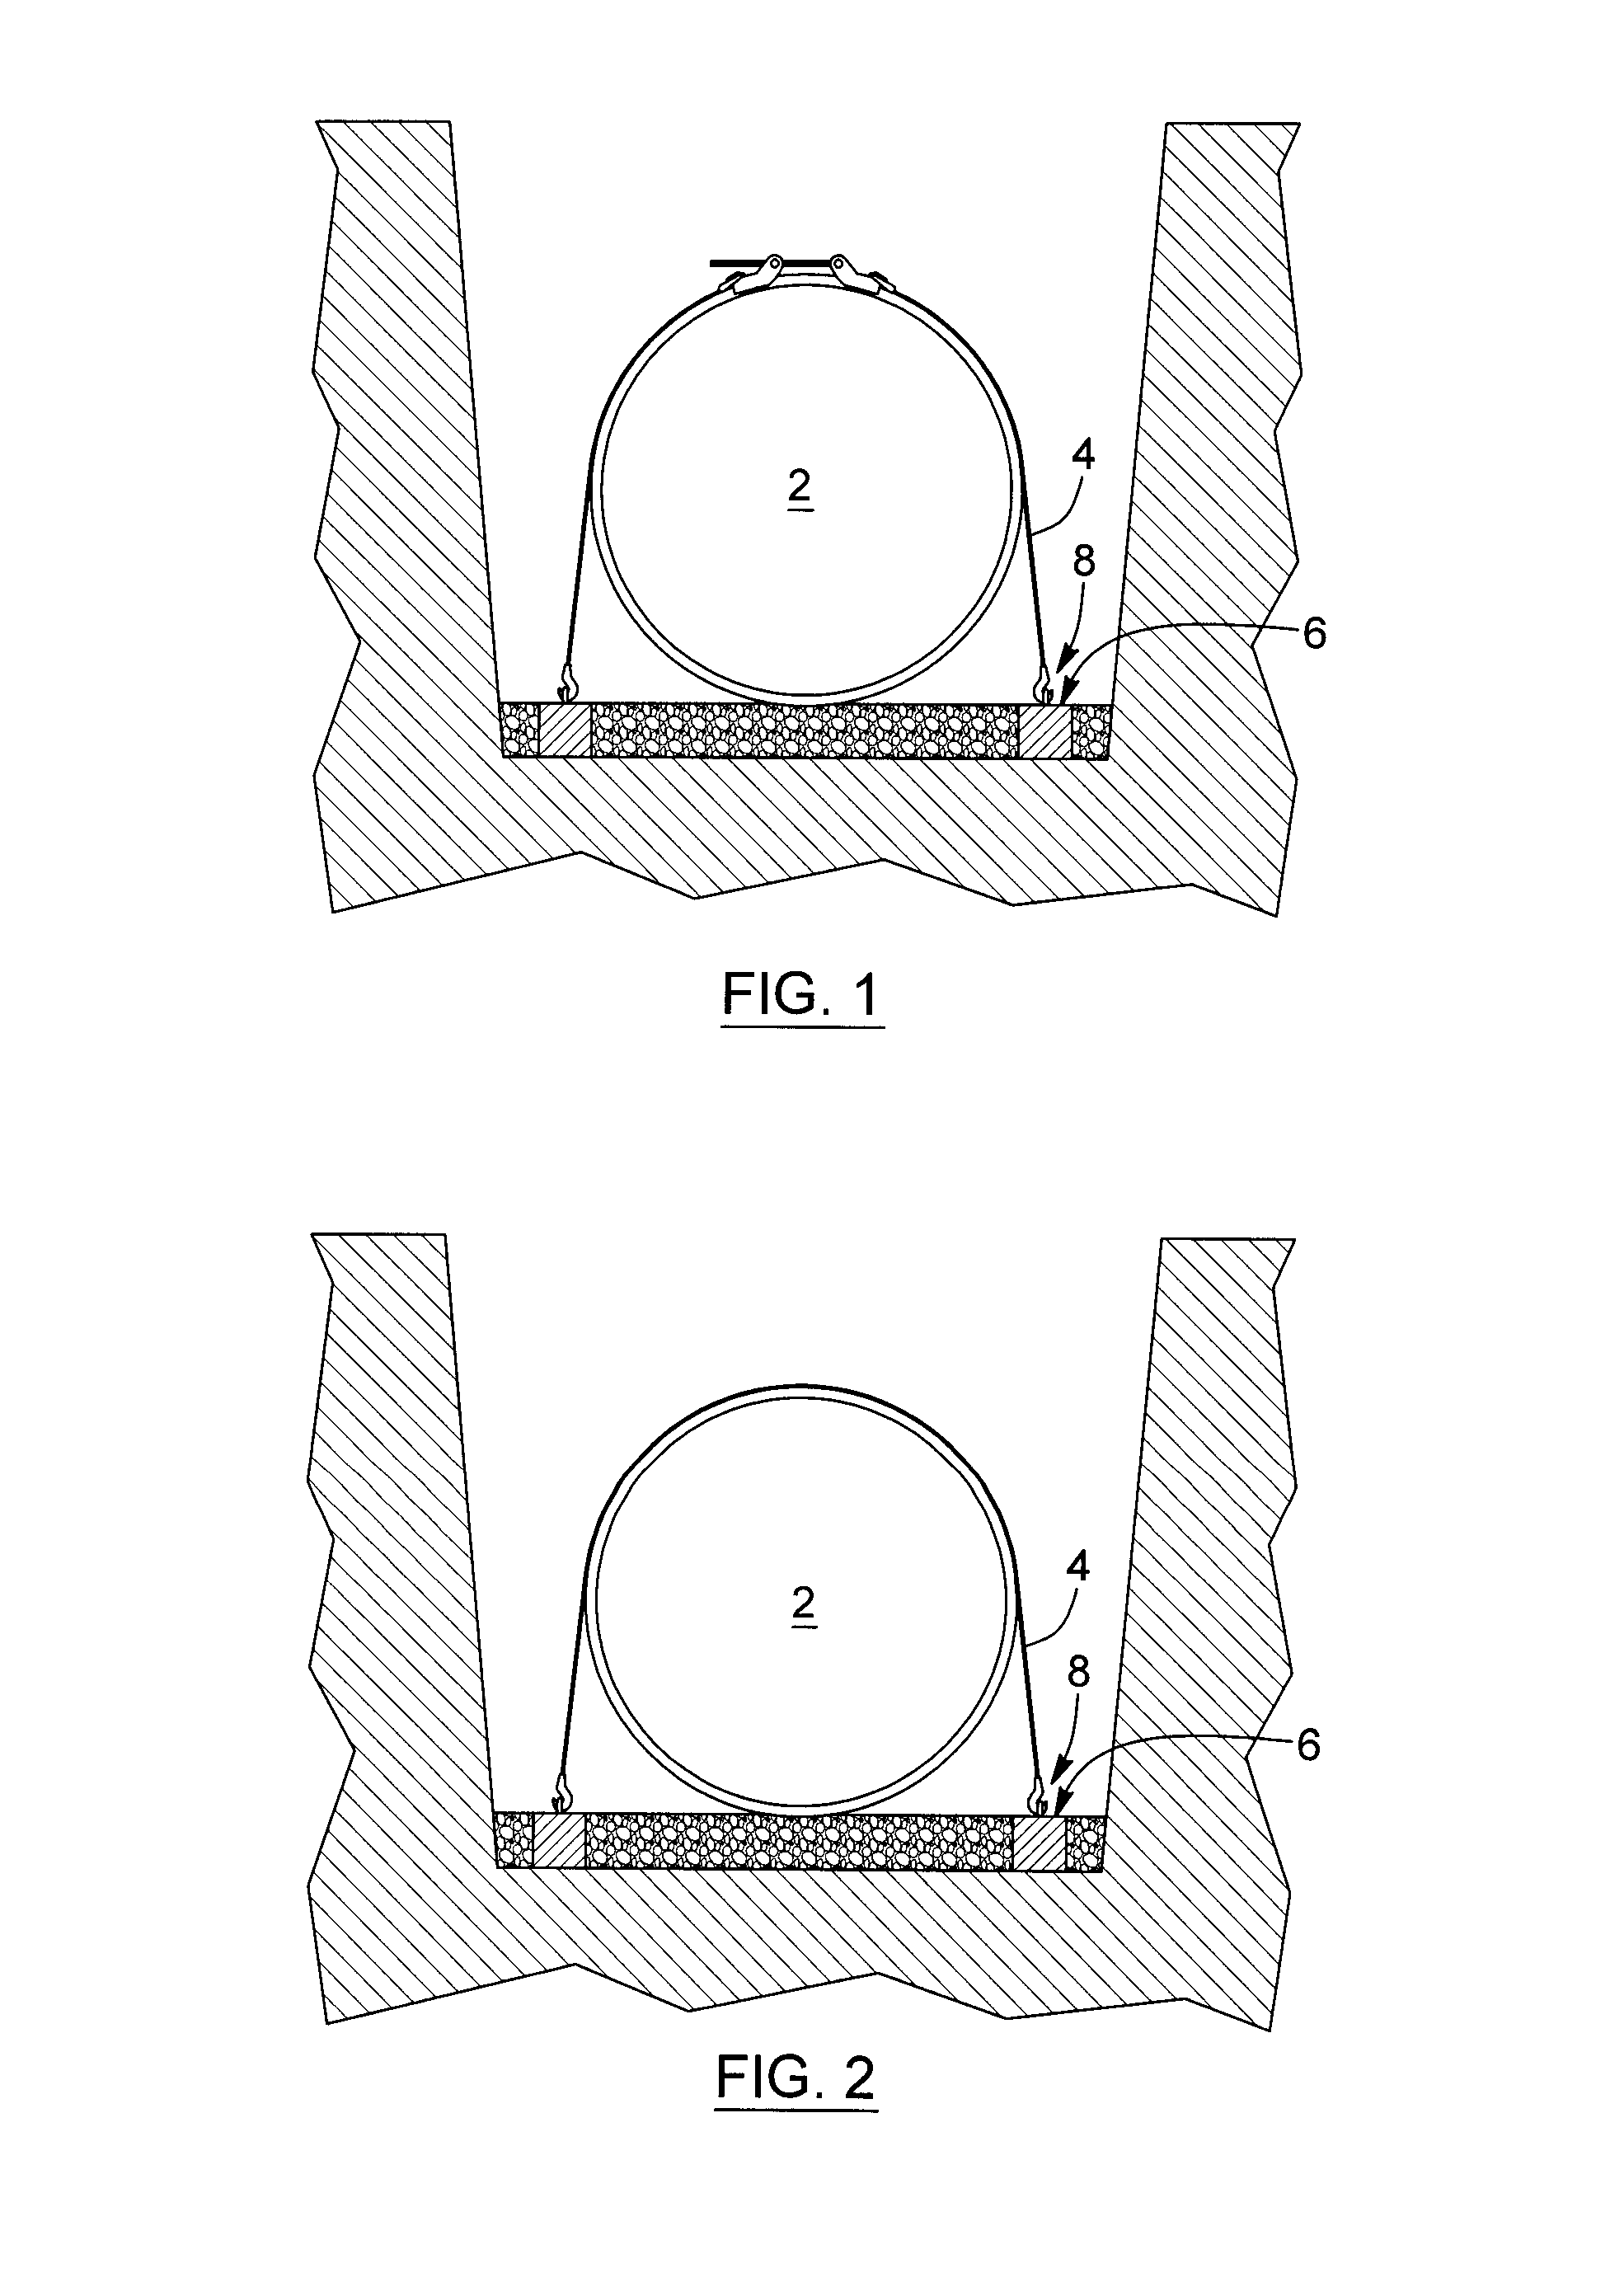 Hook with holding means and method for holding down underground tank with a strap